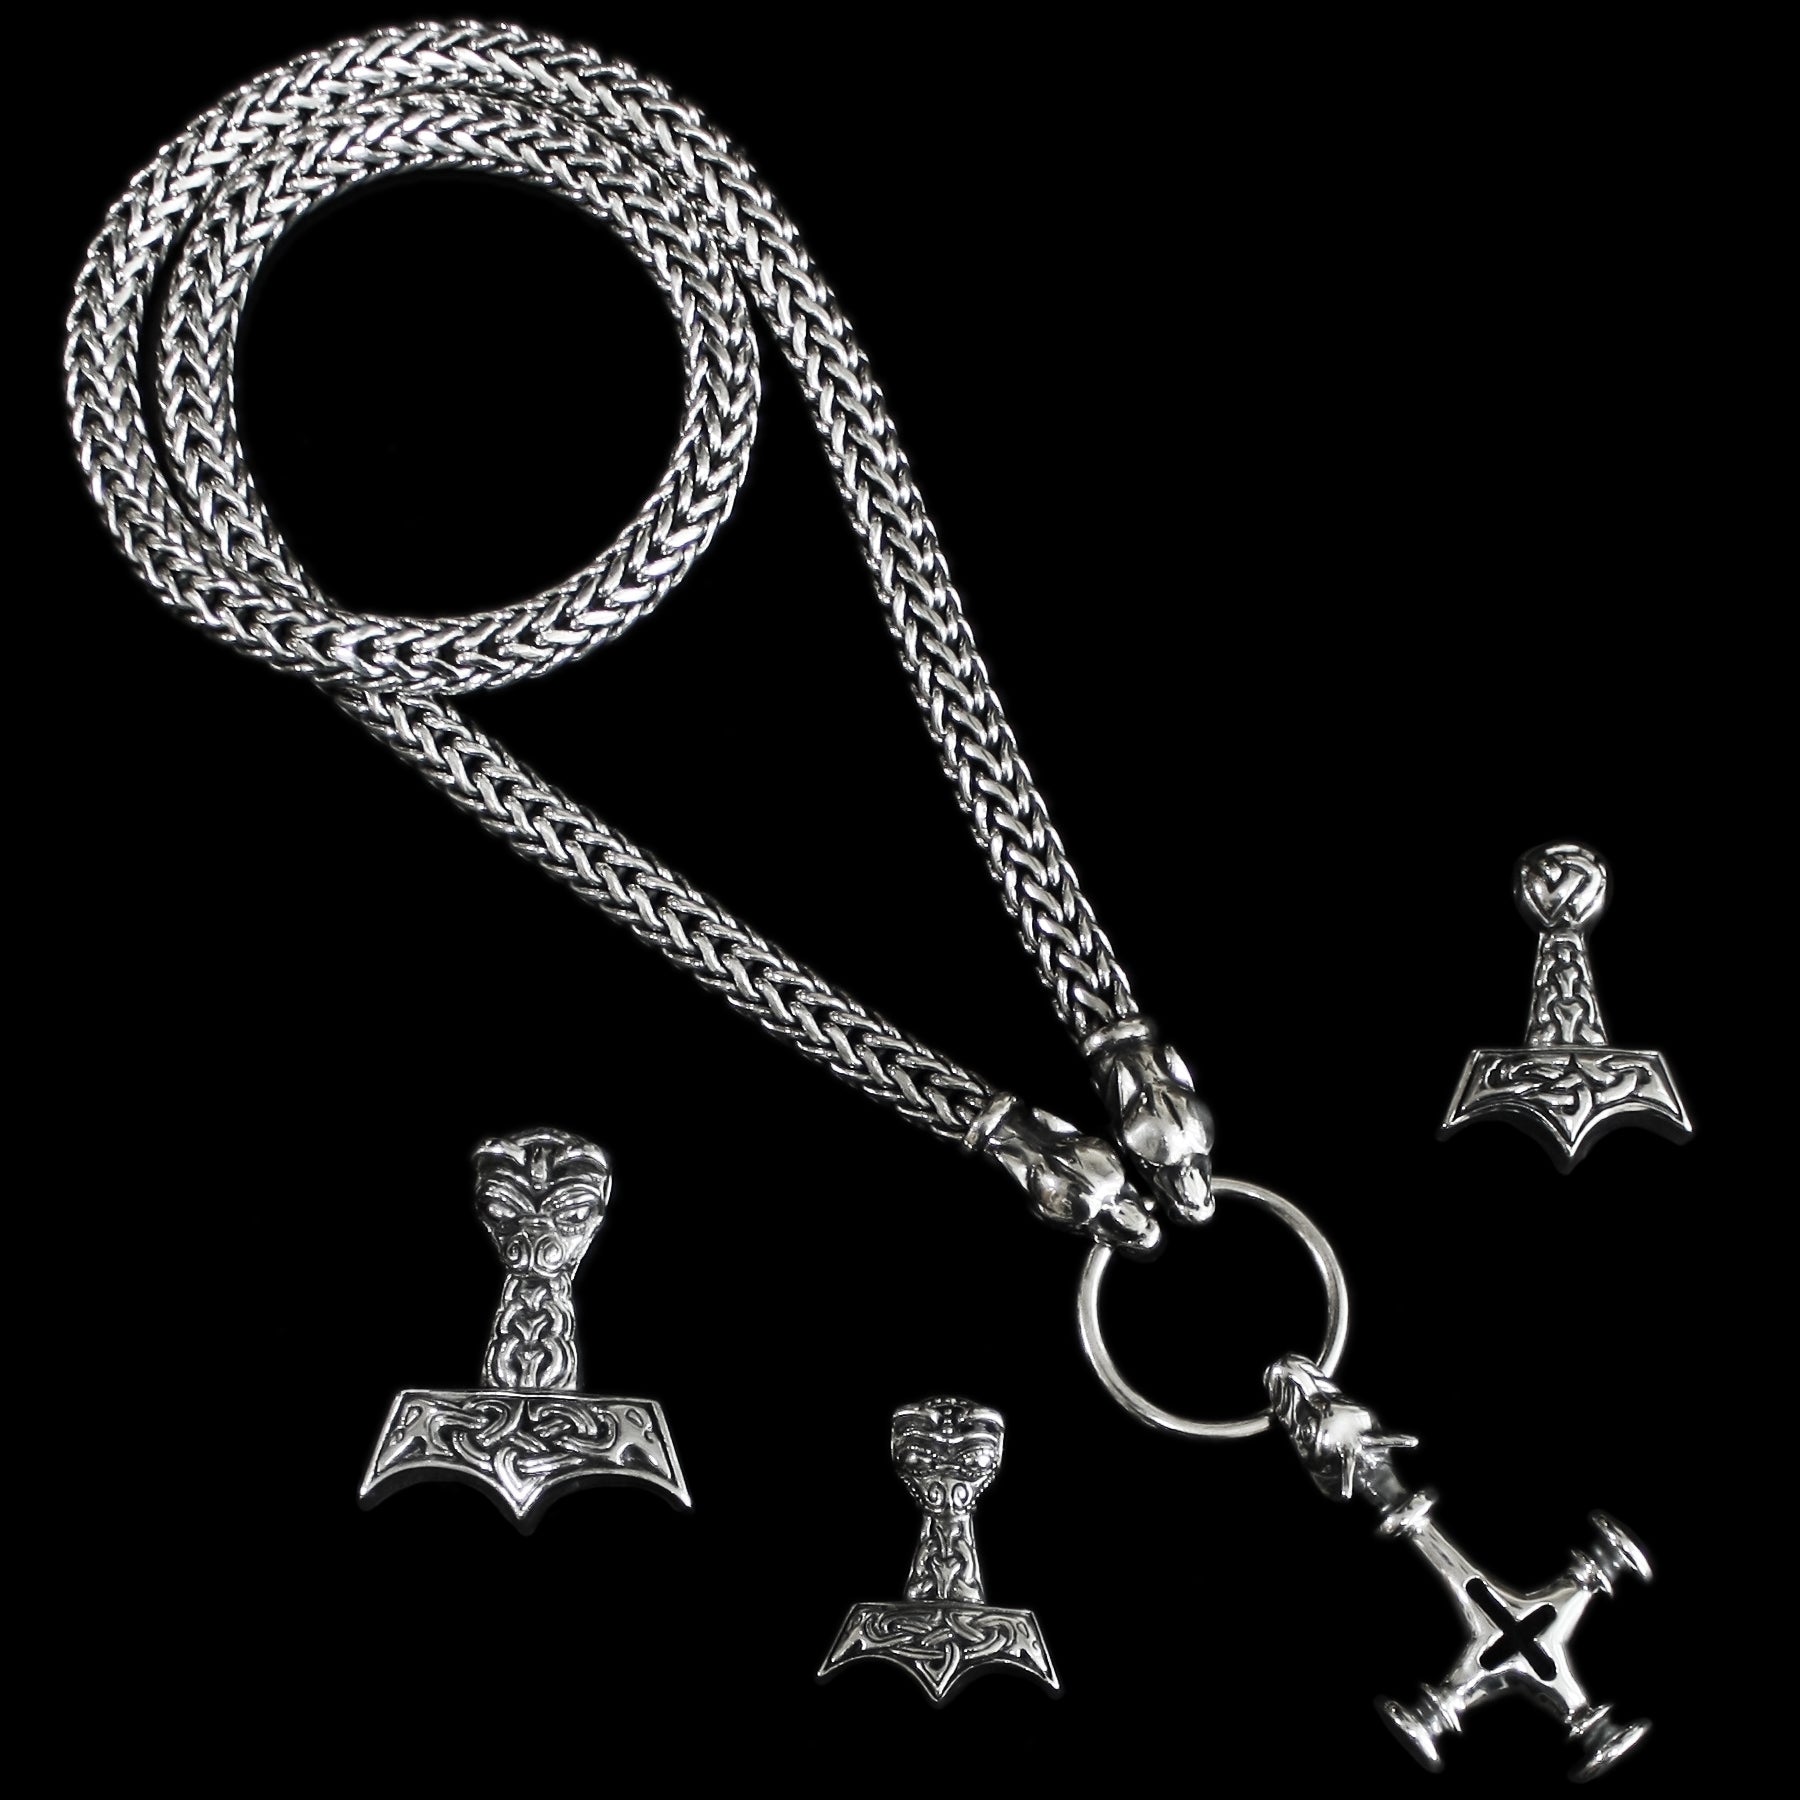 Fully Customisable 8mm Thick Silver Snake Chain Thor's Hammer Necklace with Ferocious Wolf Heads & choice of Thor's Hammer Pendants - Viking Jewelry